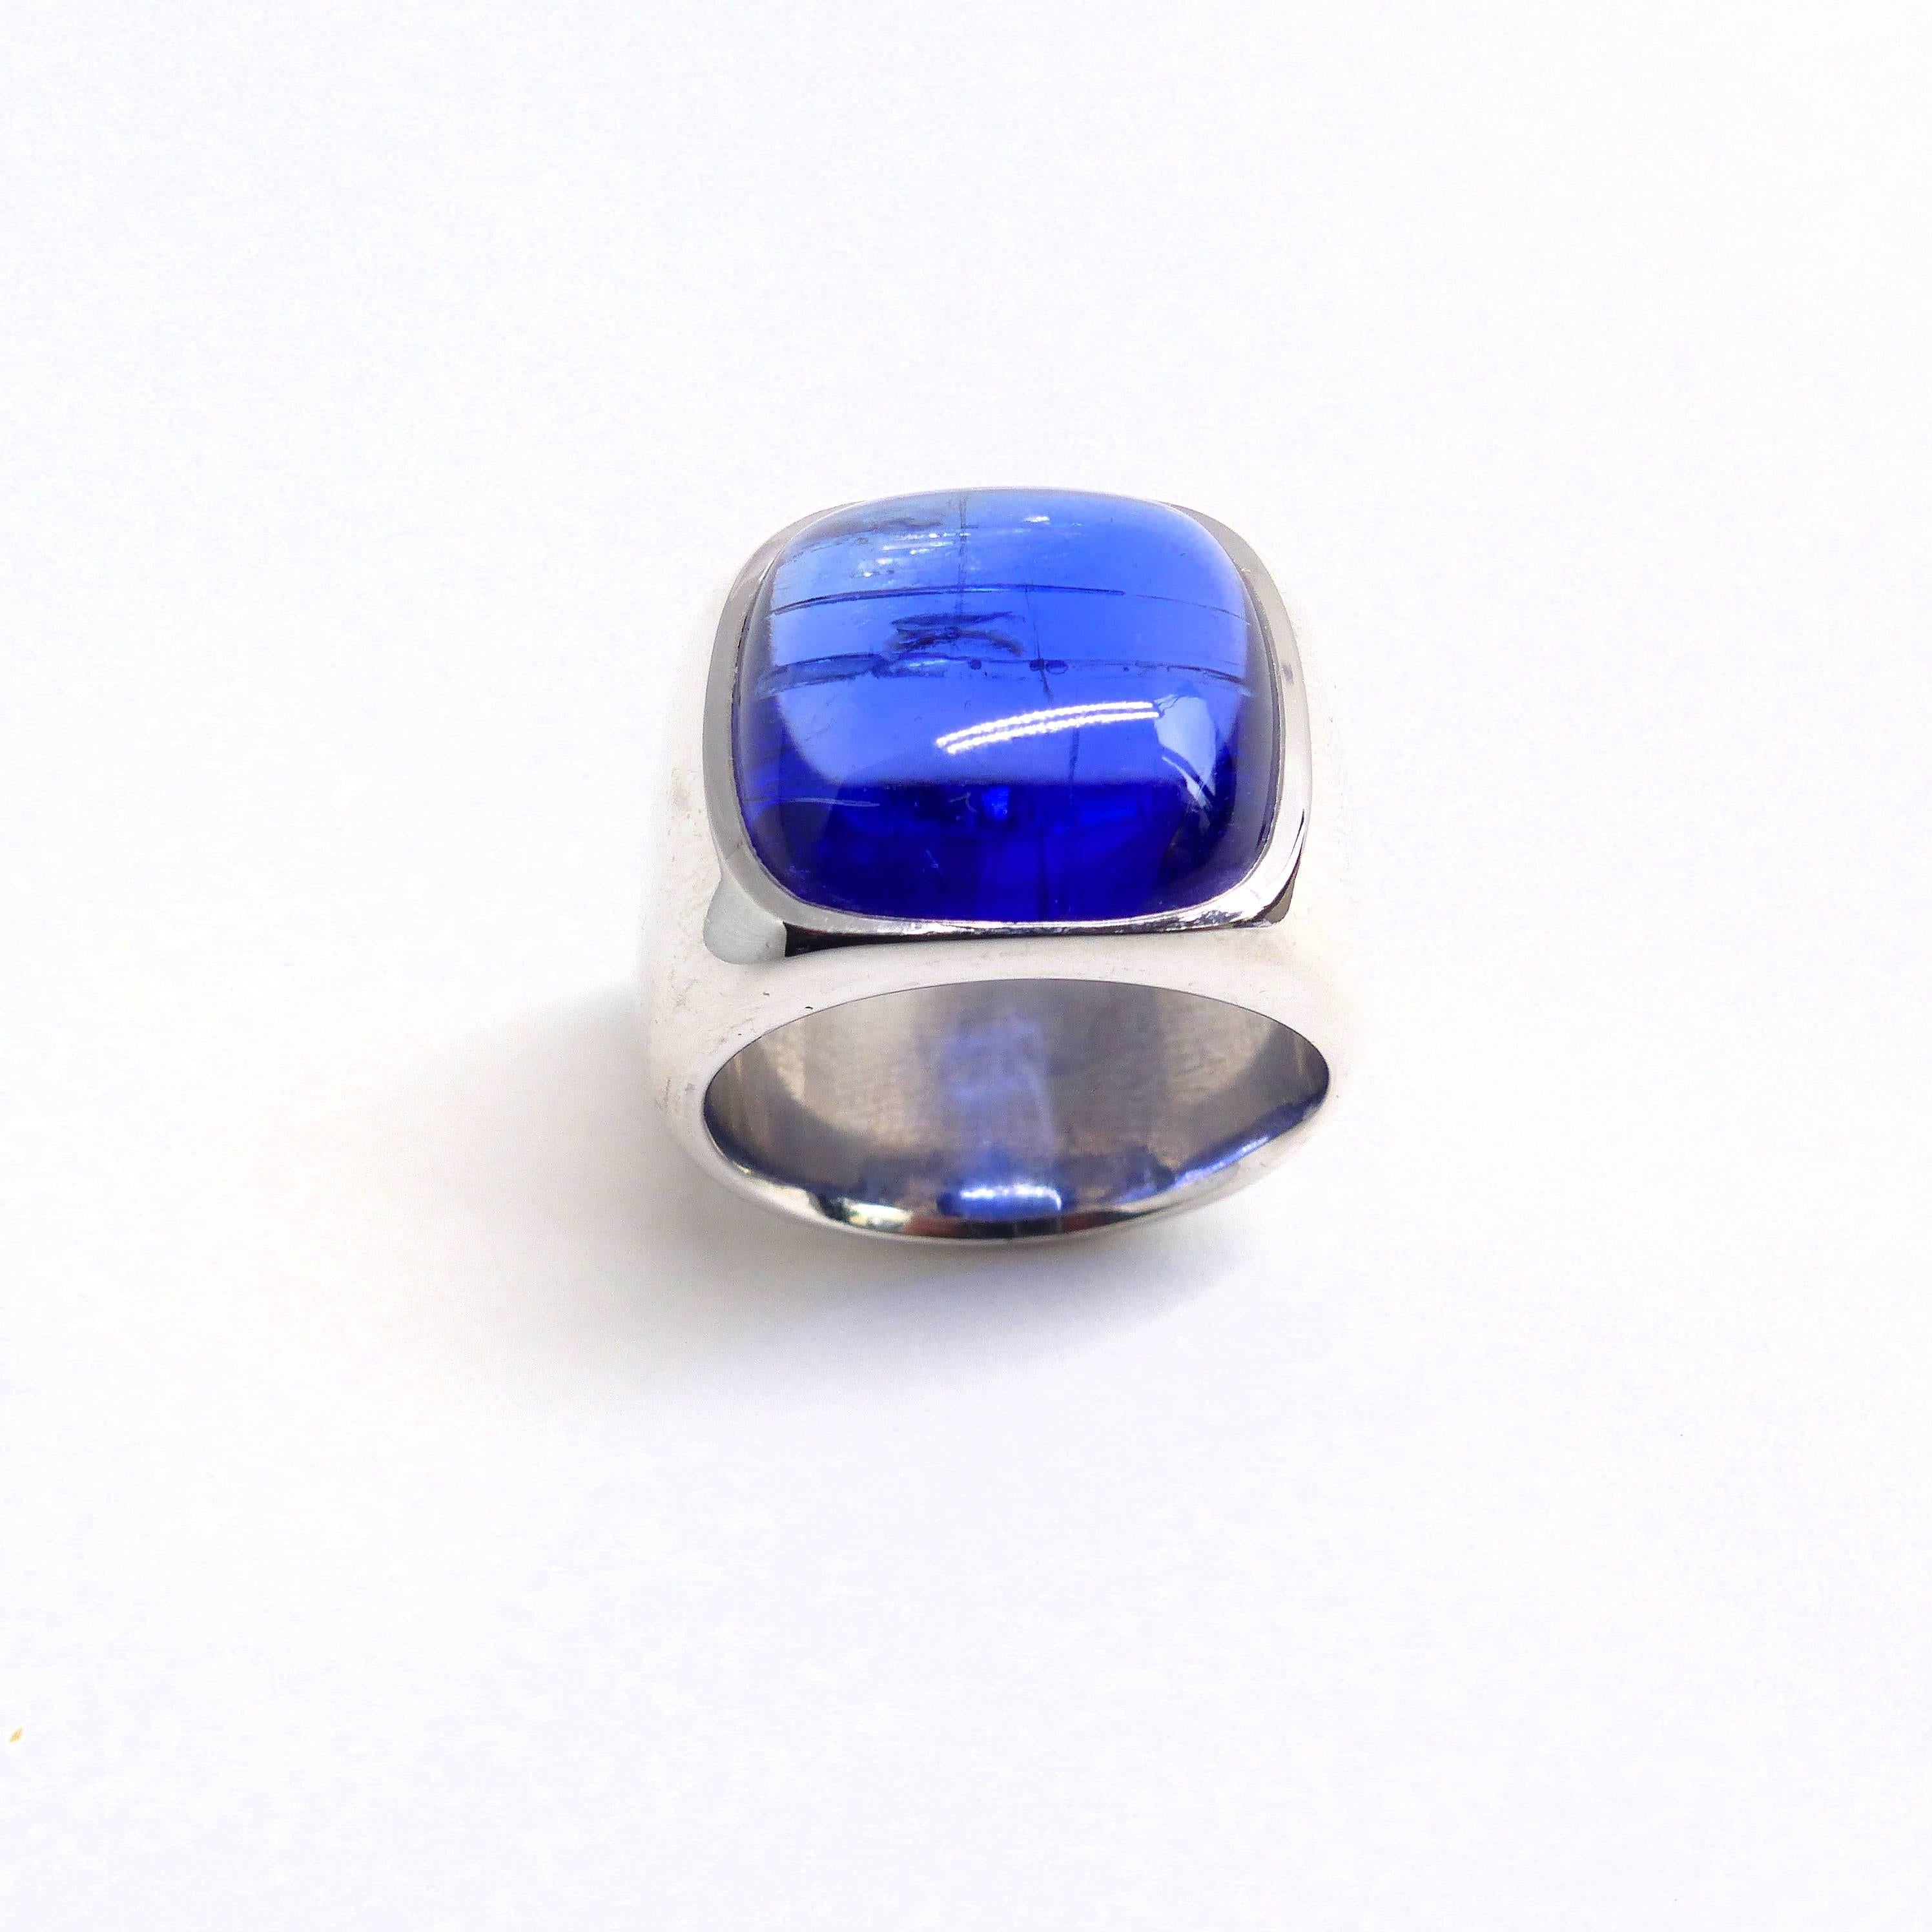 Thomas Leyser is renowned for his contemporary jewellery designs utilizing fine gemstones. 

This 18k white gold (22.07g) ring is set with 1x fine Tanzanite Cabouchon (cushion, 16x16mm, 15.55ct).

Ringsize: 7 1/4 (55.5)